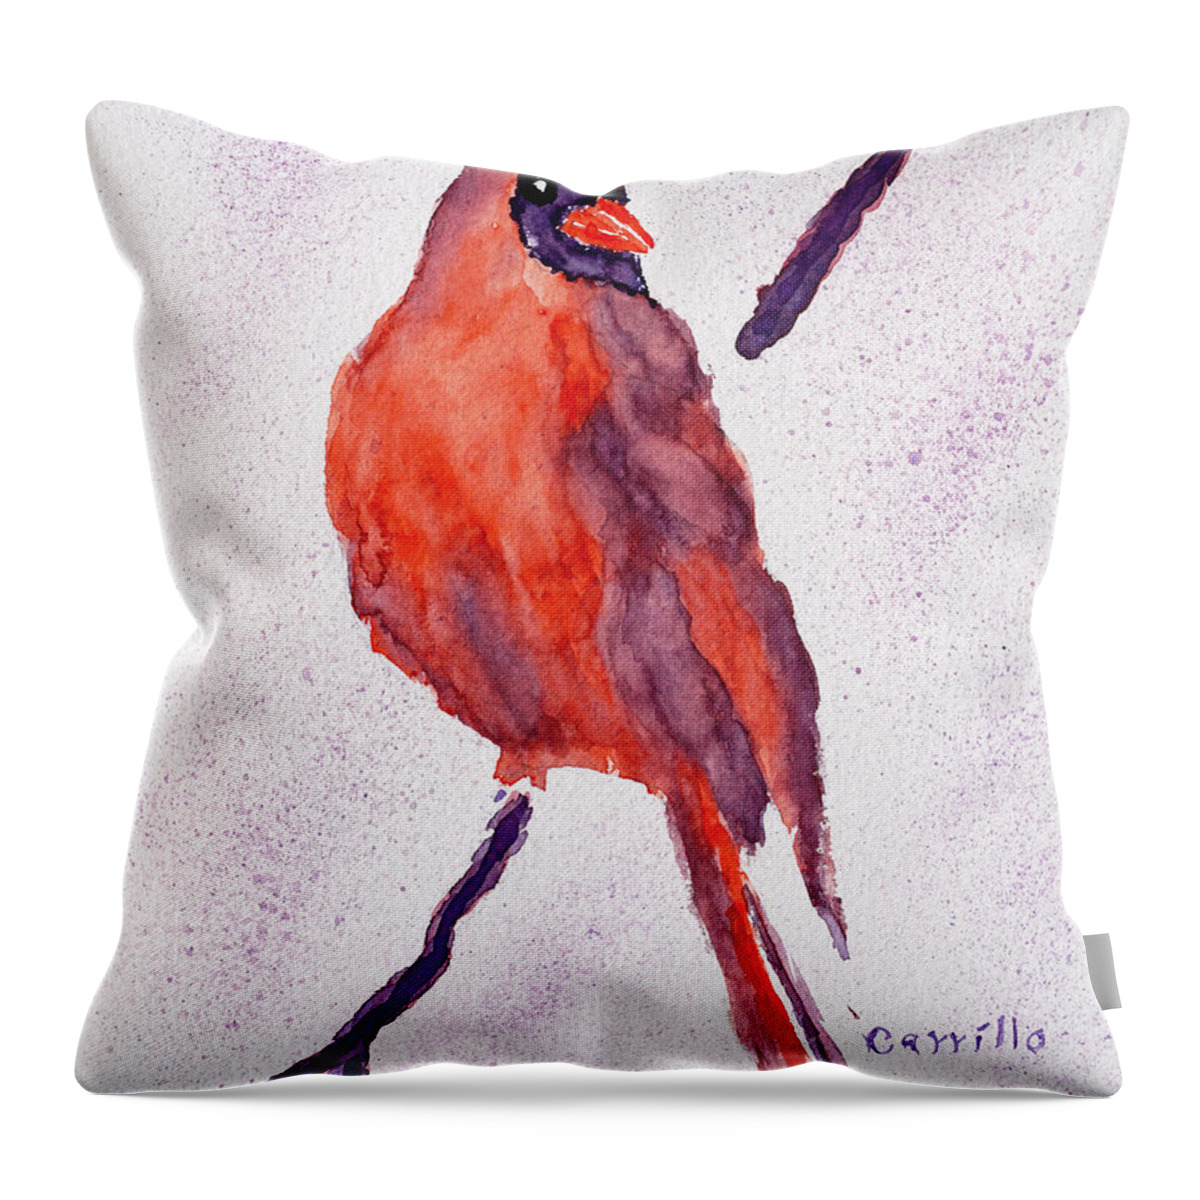 Red Bird Throw Pillow featuring the painting Red Bird by Ruben Carrillo